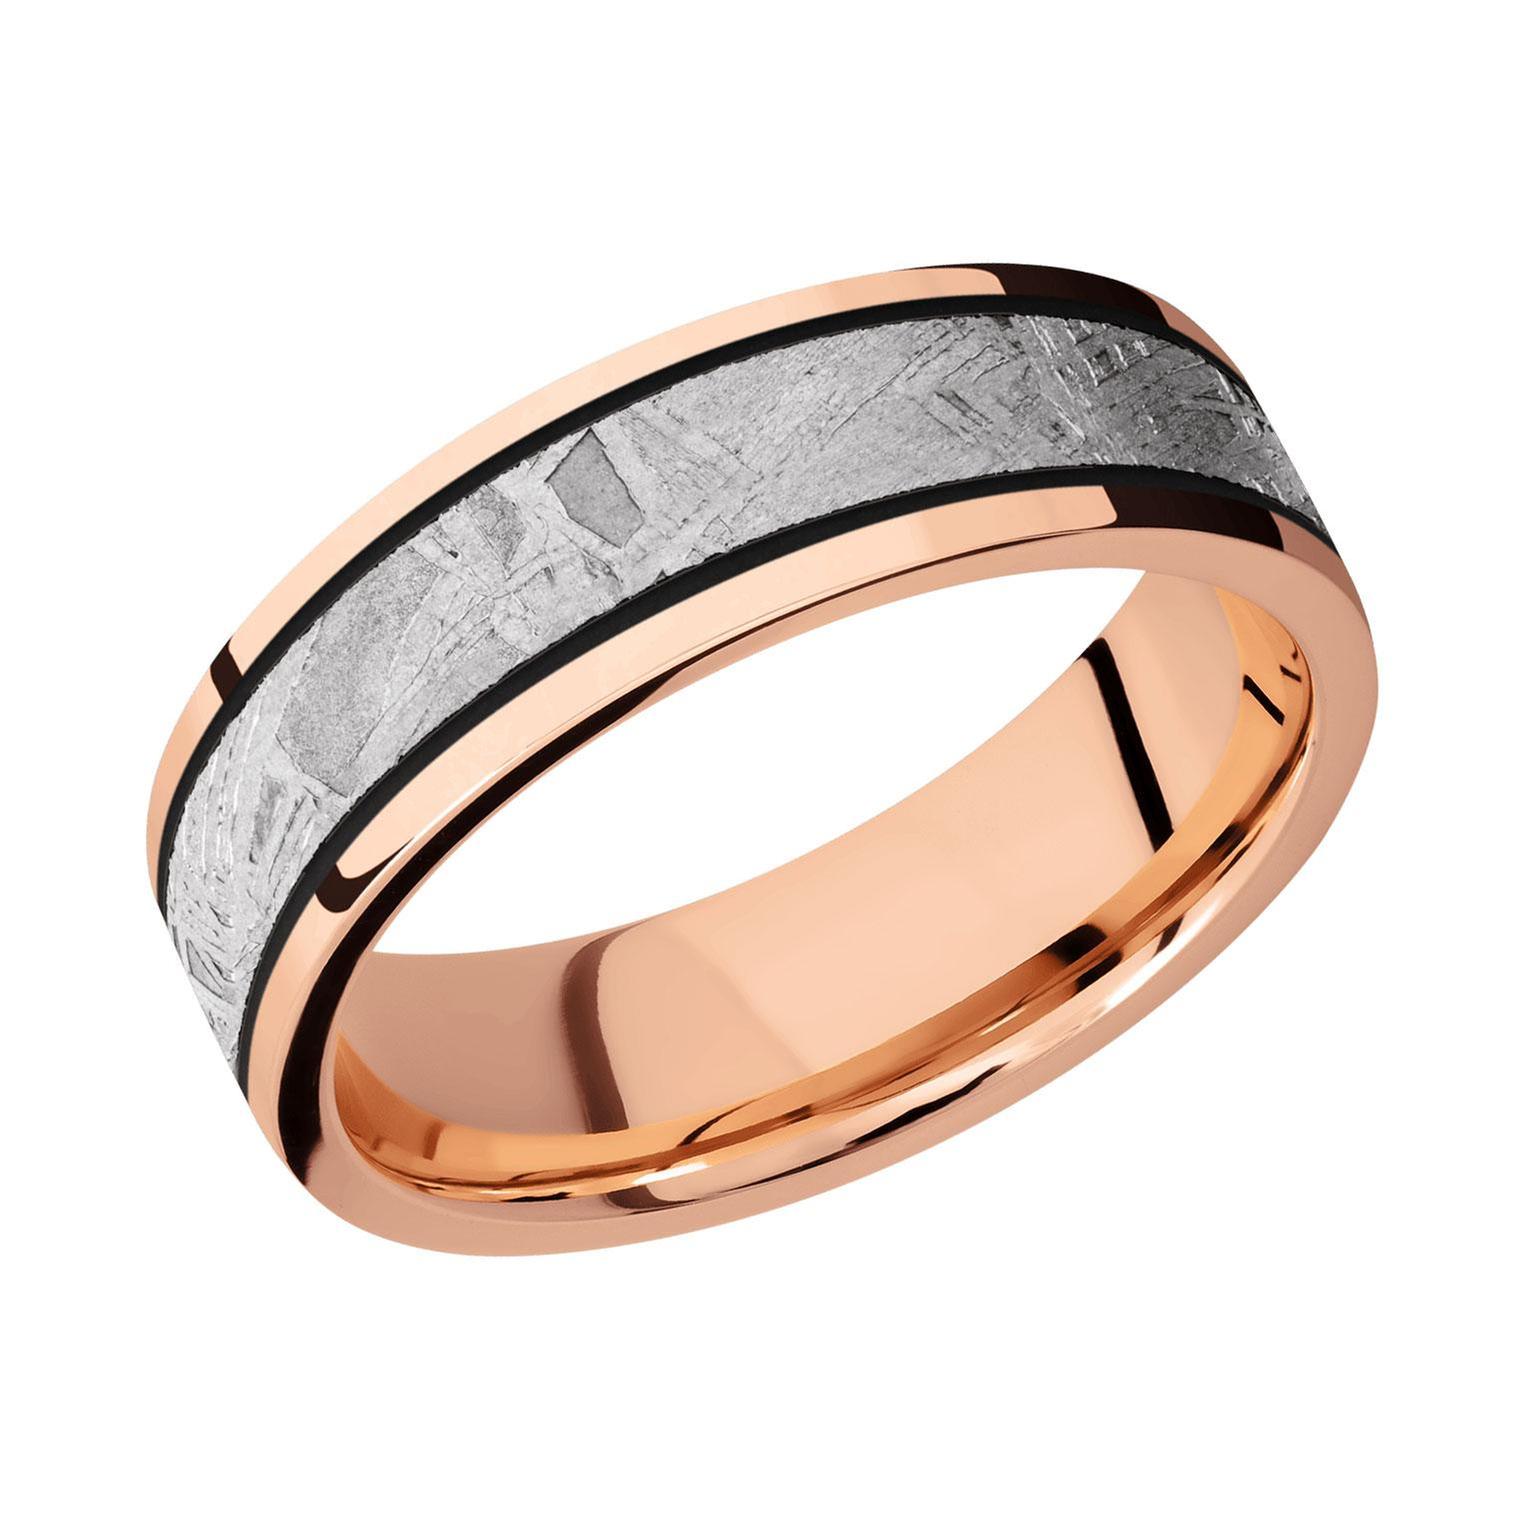 Lashbrook Rose Gold with Meteorite and Black Cerakote Inlay Comfort Fit Band, 7mm